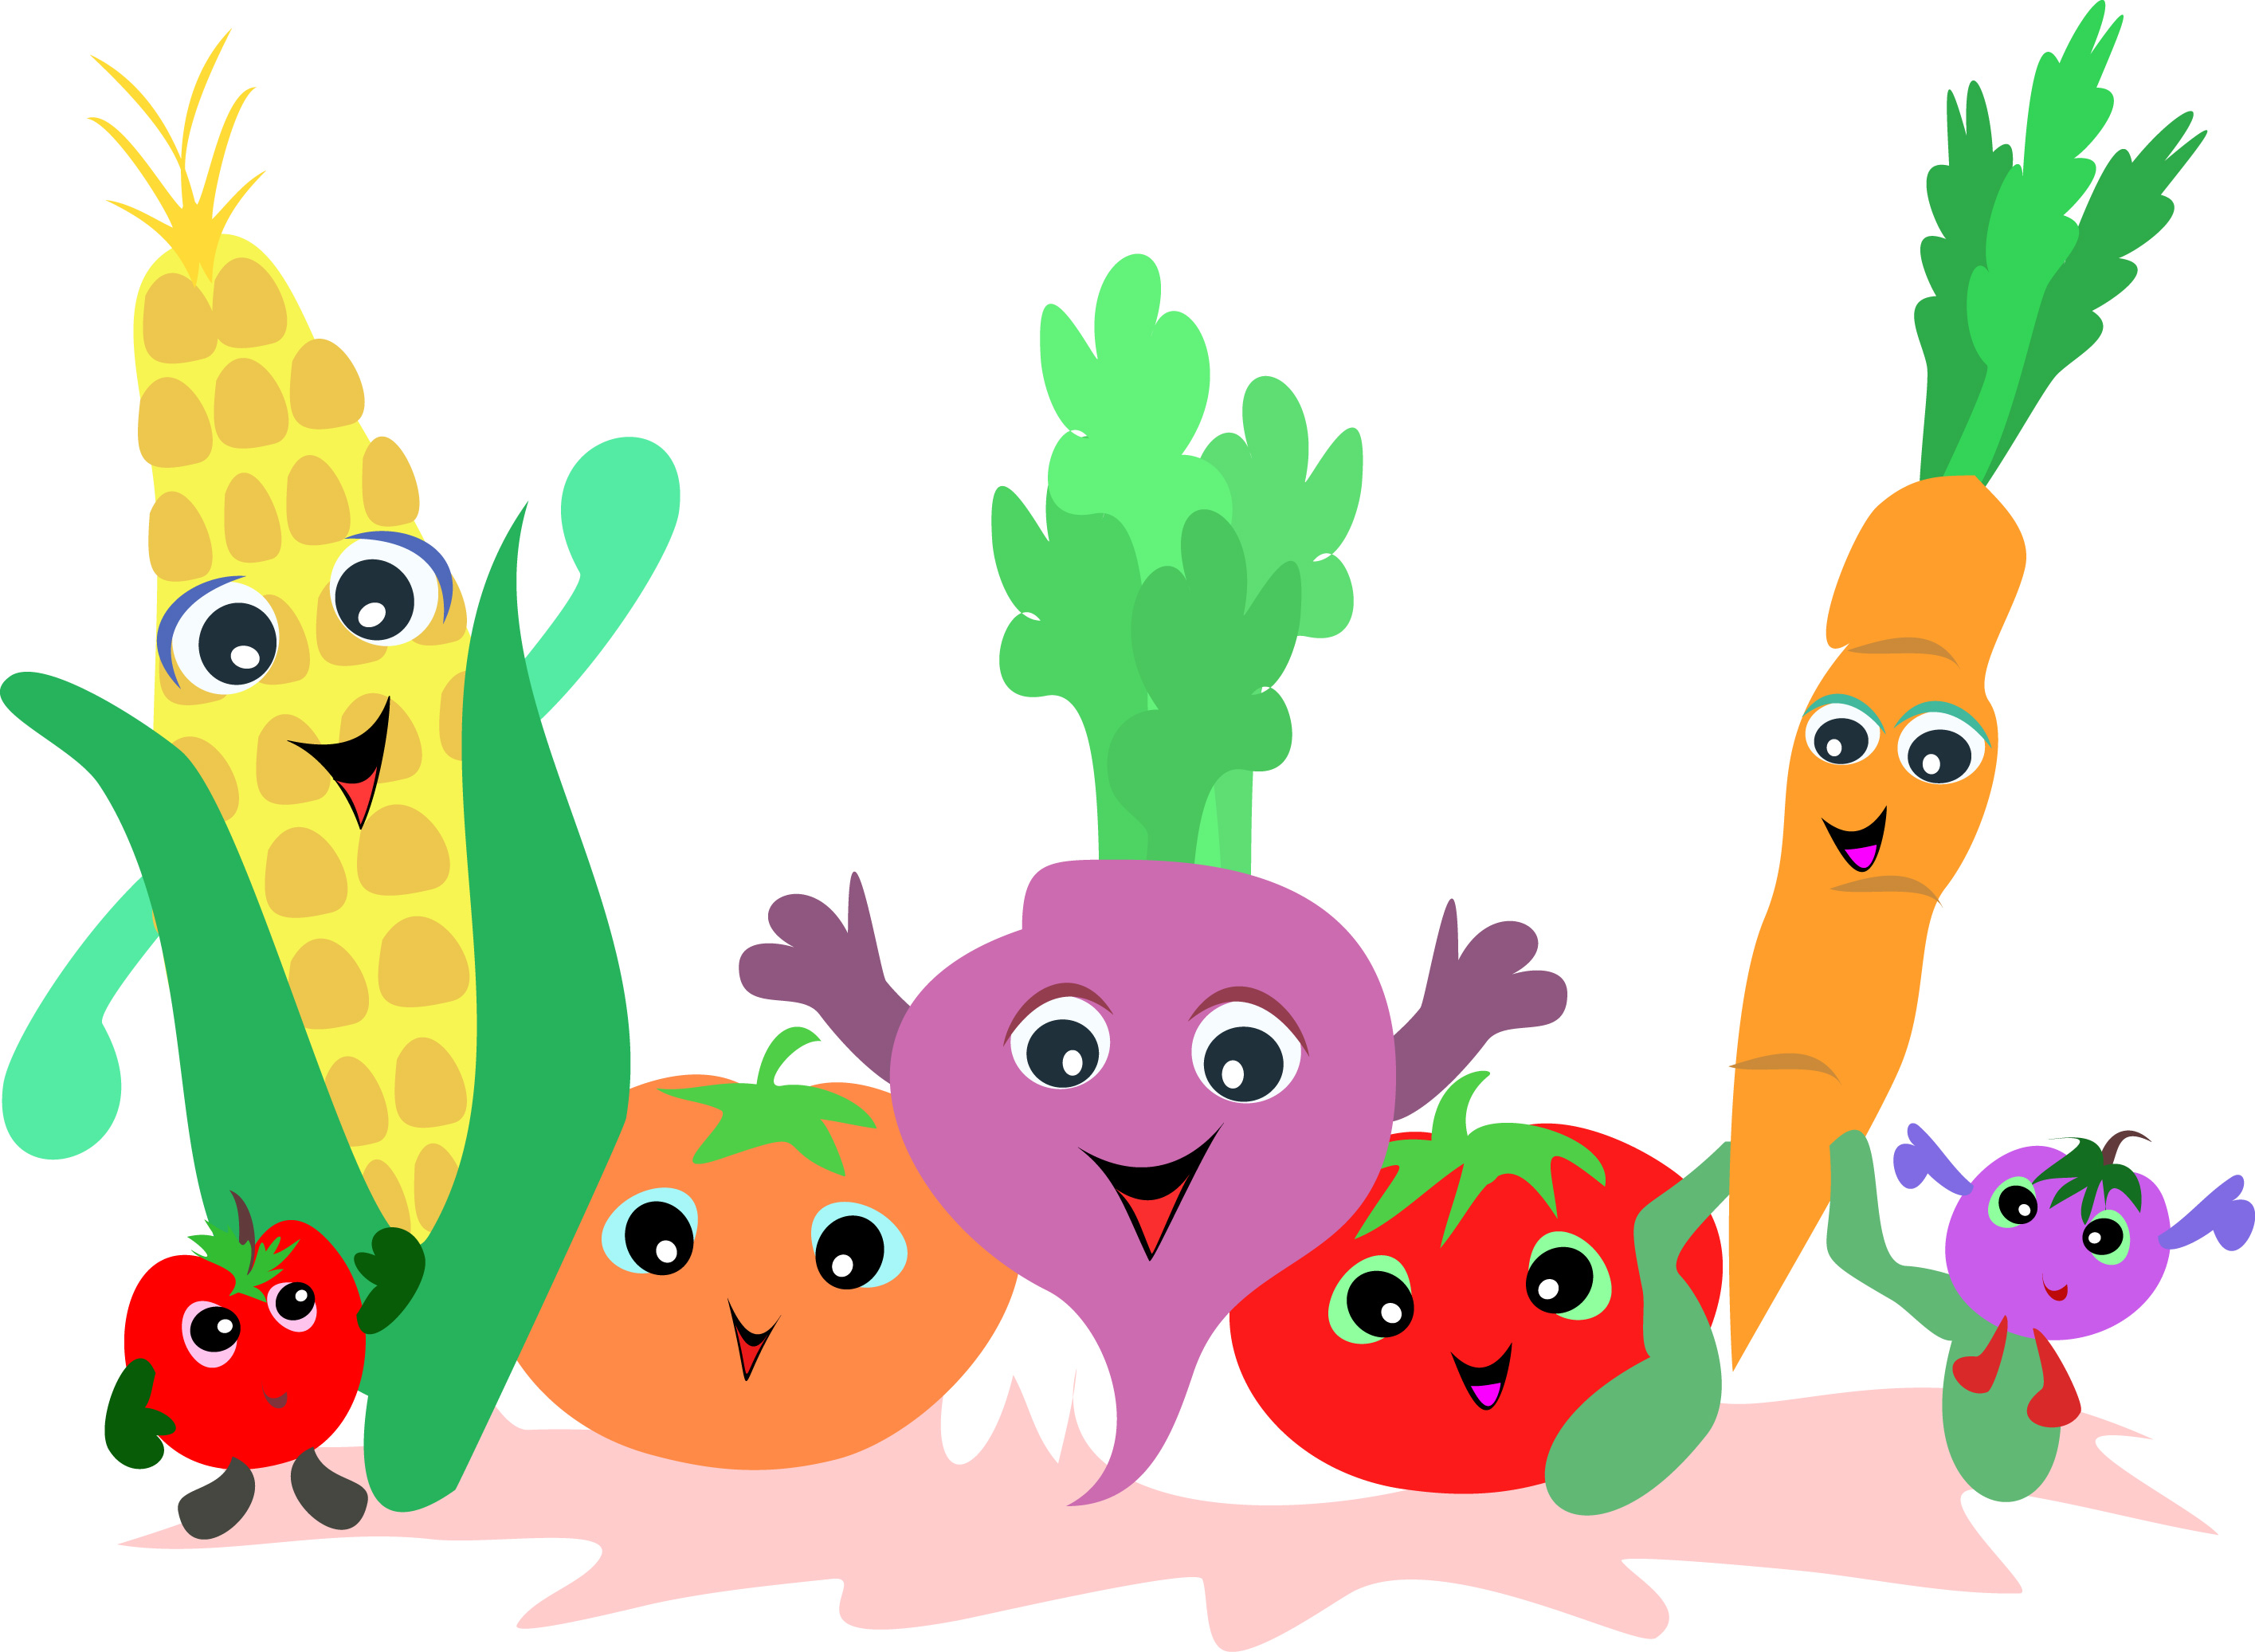 Vegetable garden clipart and 2